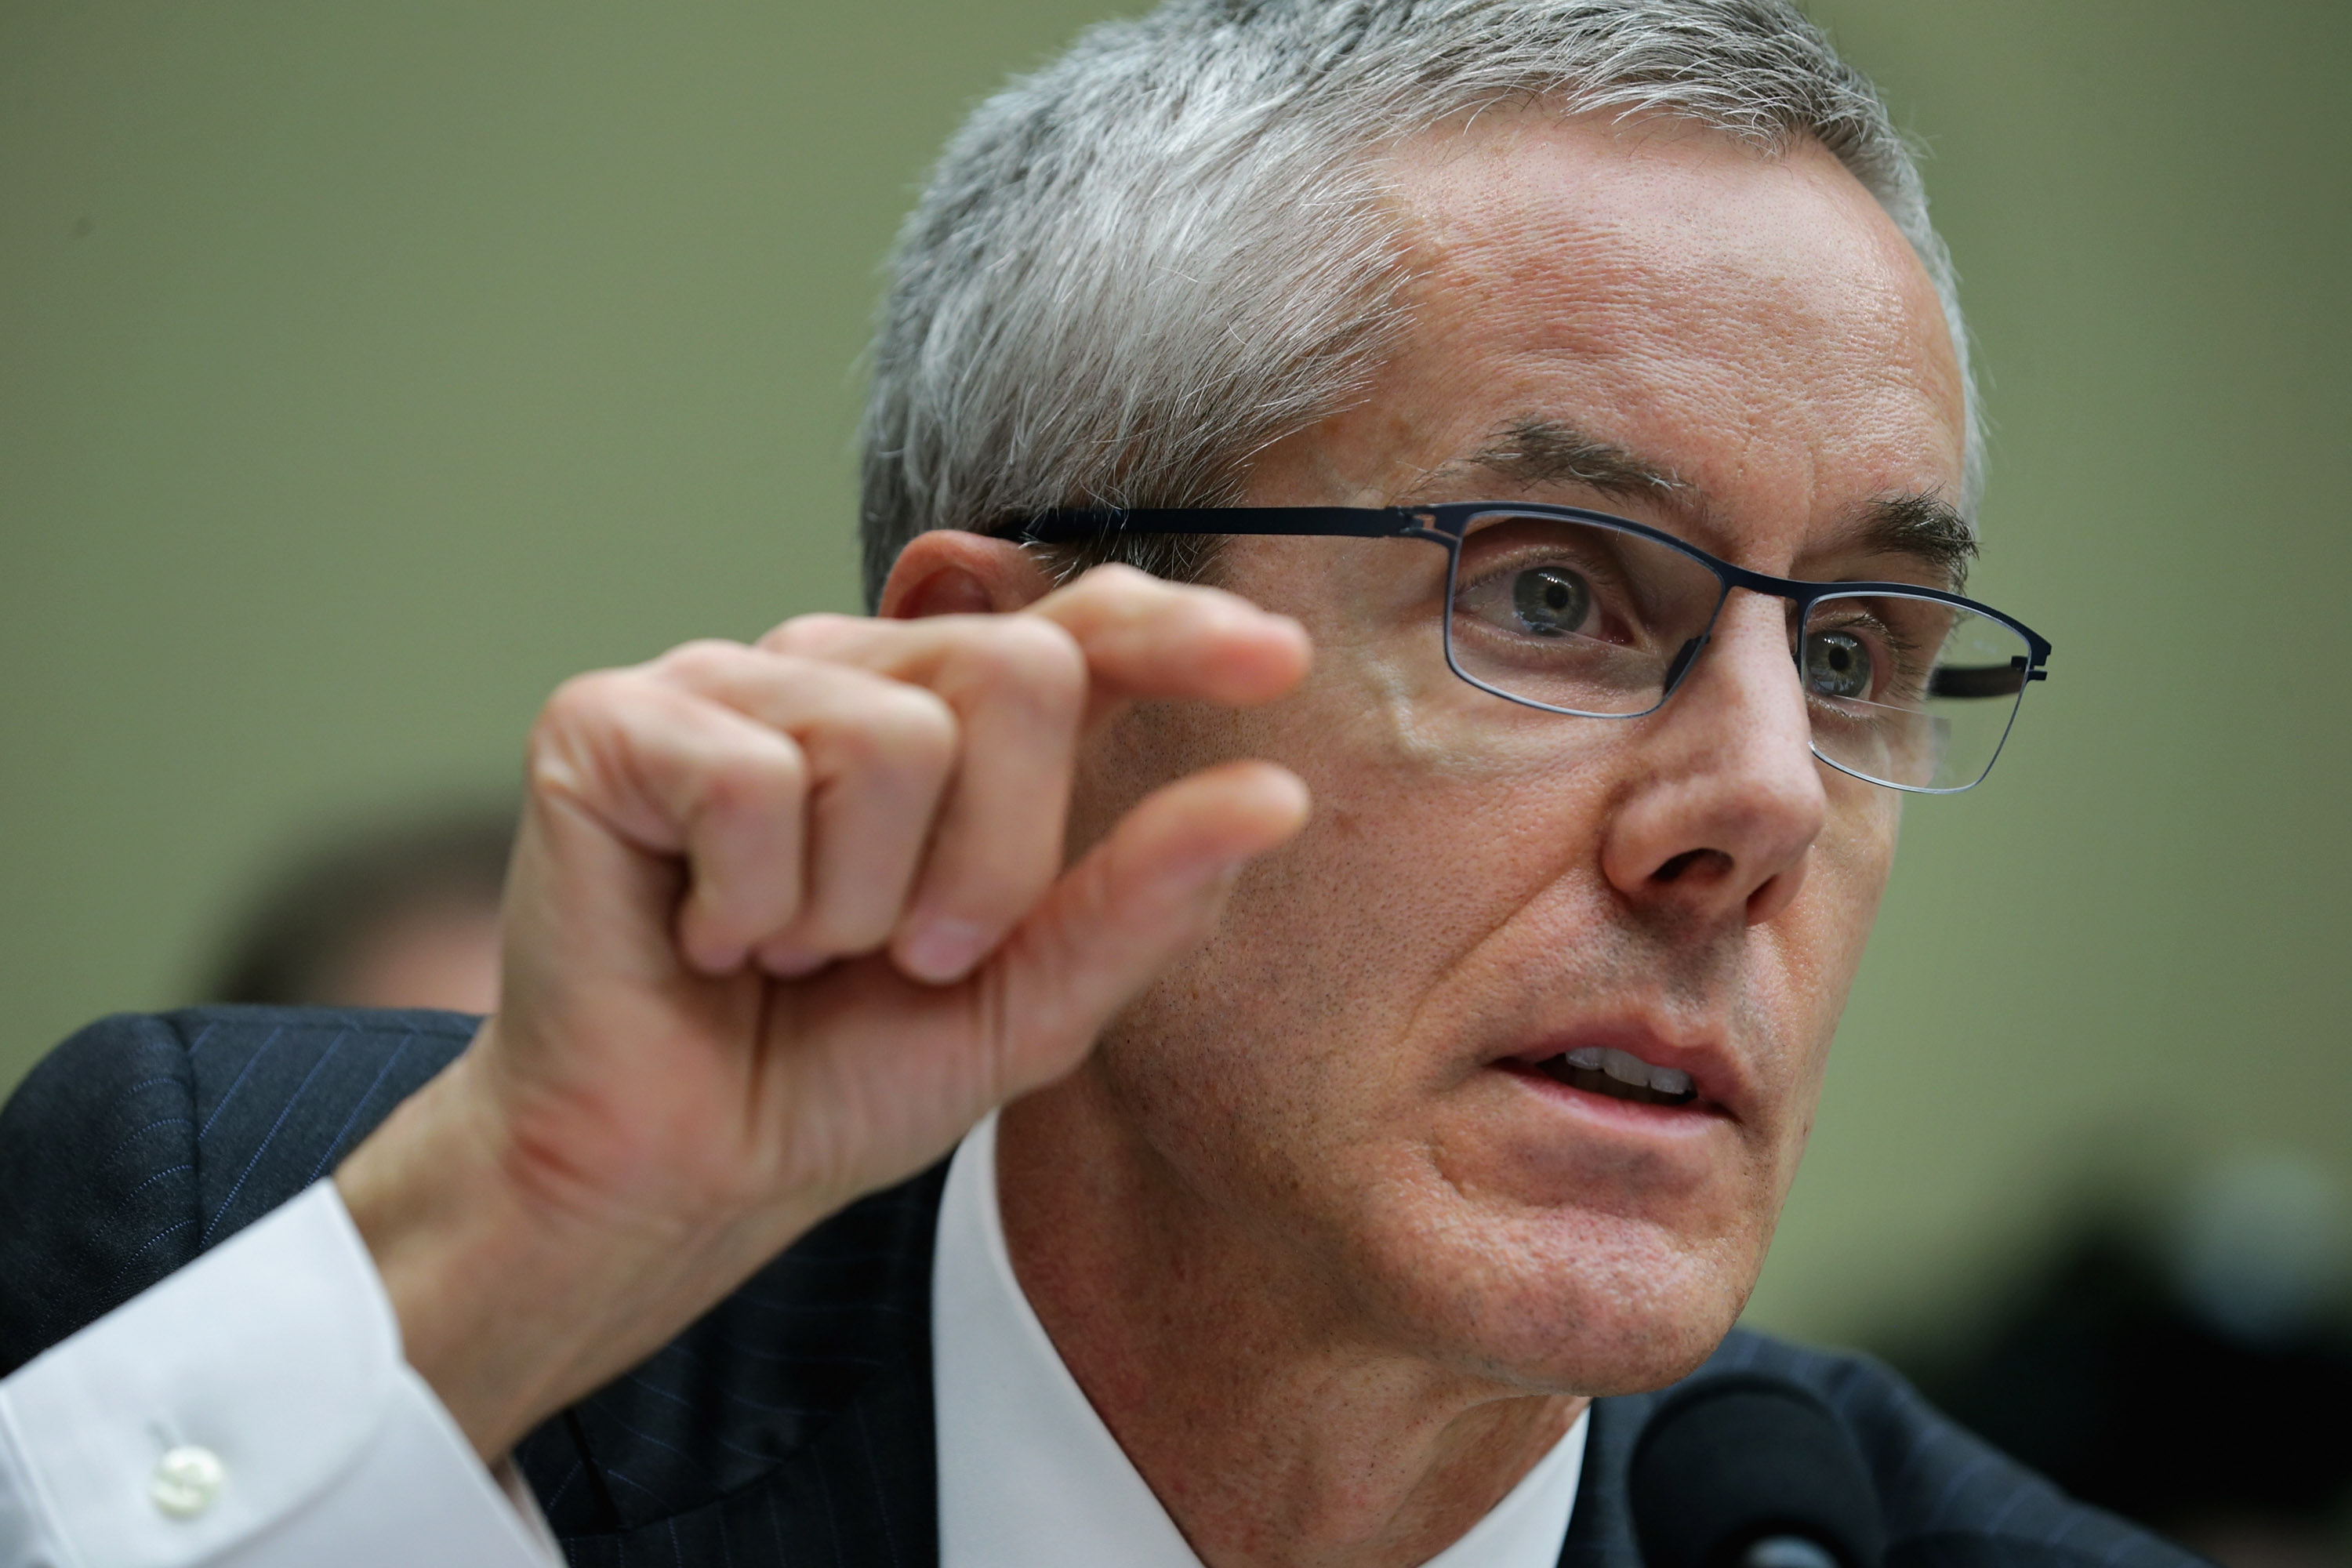 Transportation Security Administration Adminstrator Peter Neffenger testifies before the House Oversight and Government Reform Committee about lapses in TSA screening  on November 3, 2015 in Washington, DC. (Chip Somodevilla—Getty Images)